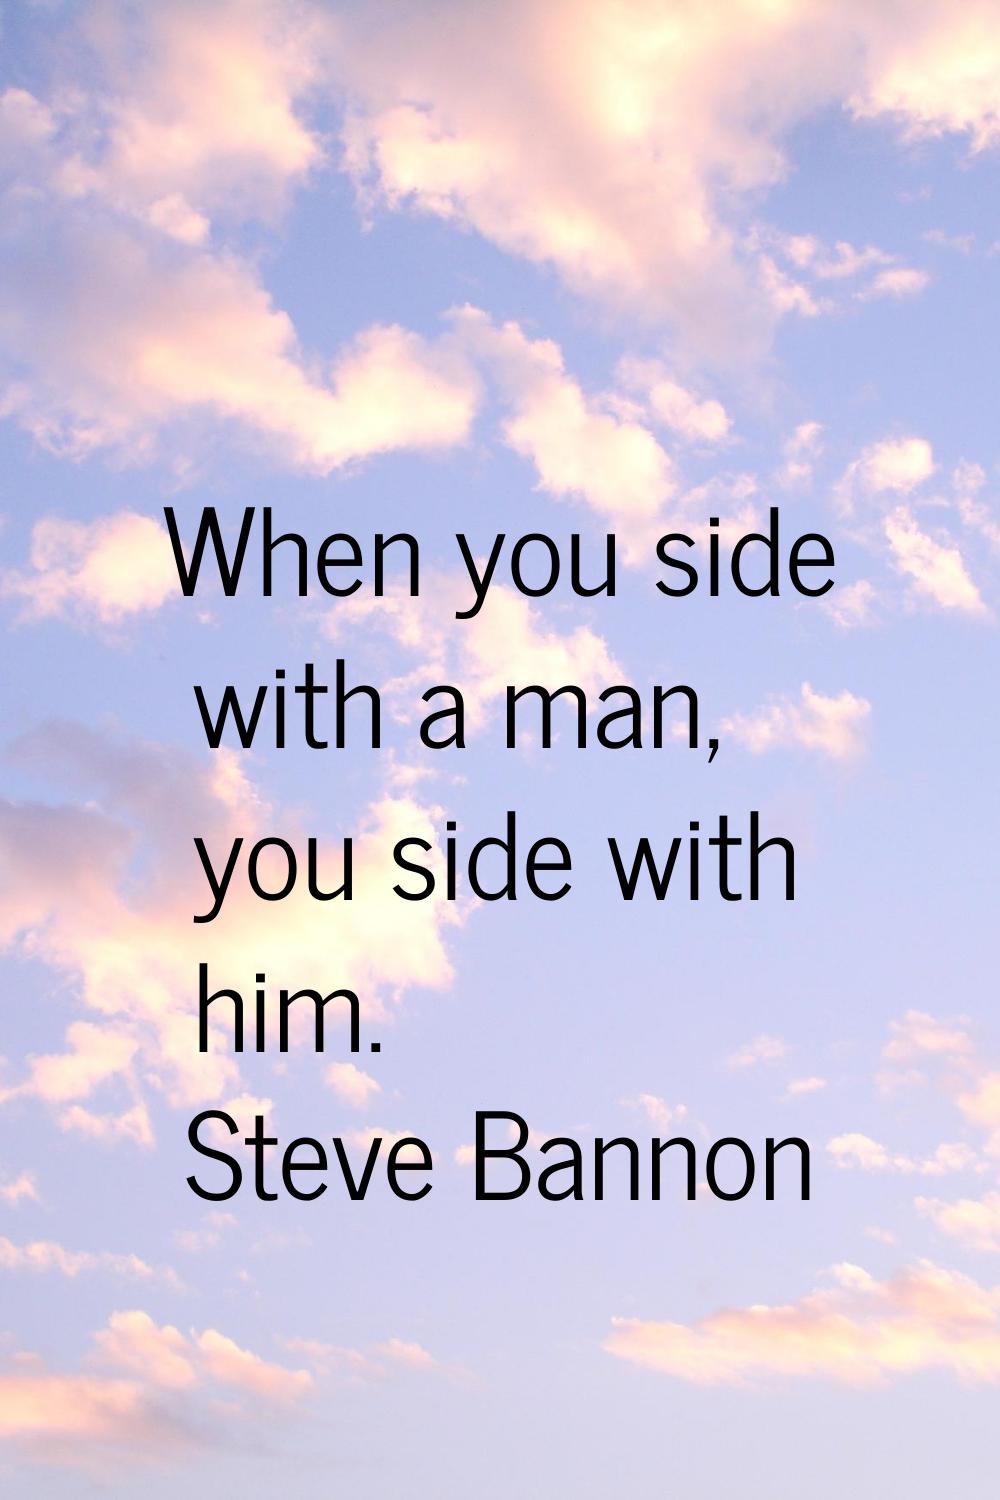 When you side with a man, you side with him.